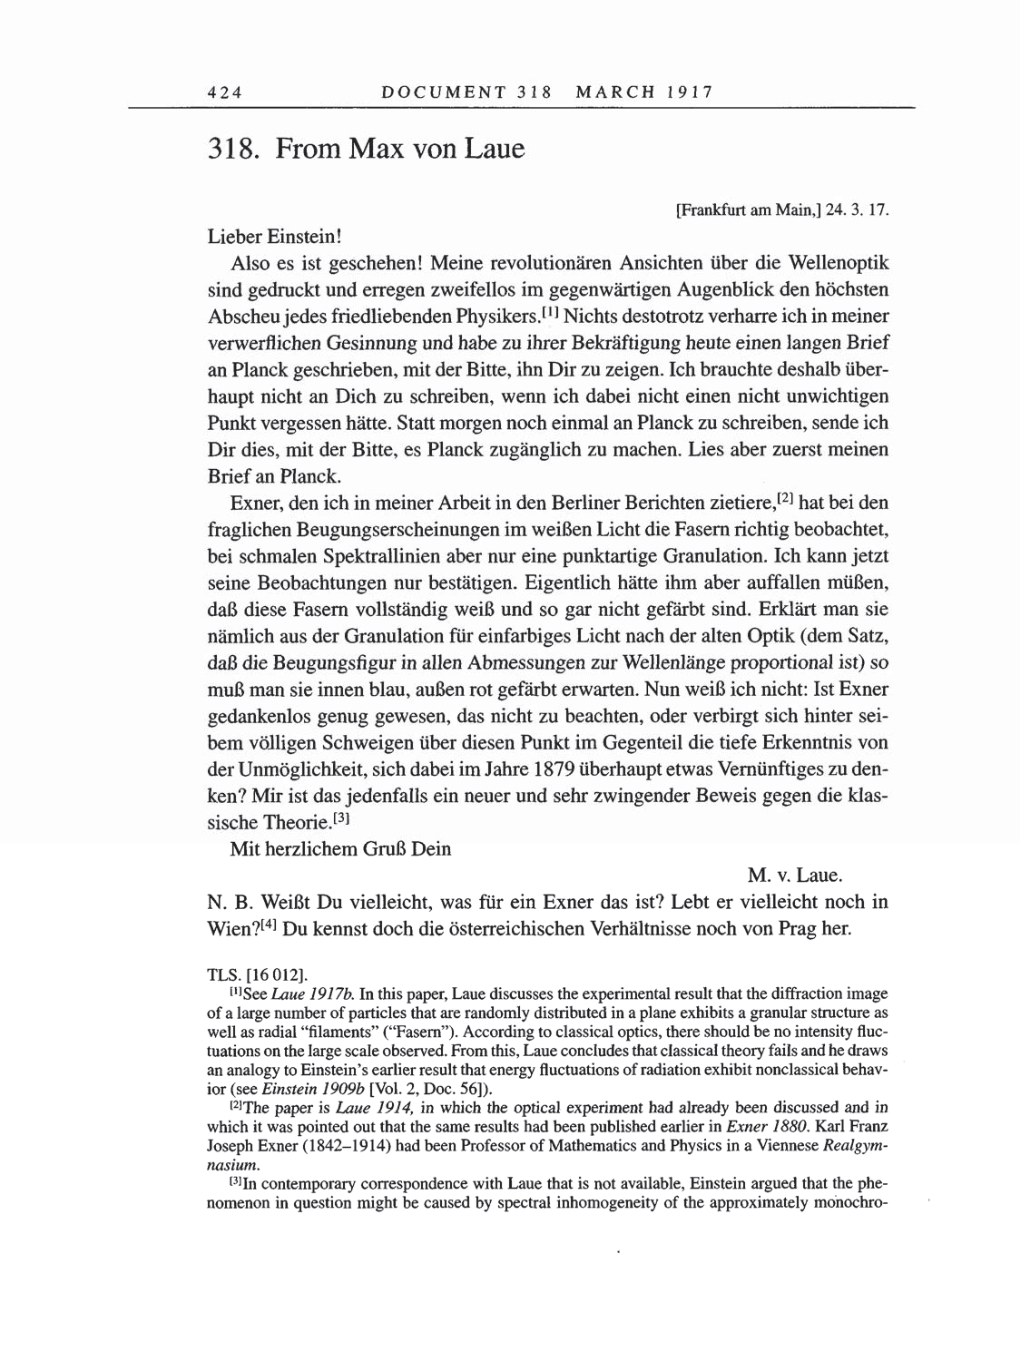 Volume 8, Part A: The Berlin Years: Correspondence 1914-1917 page 424